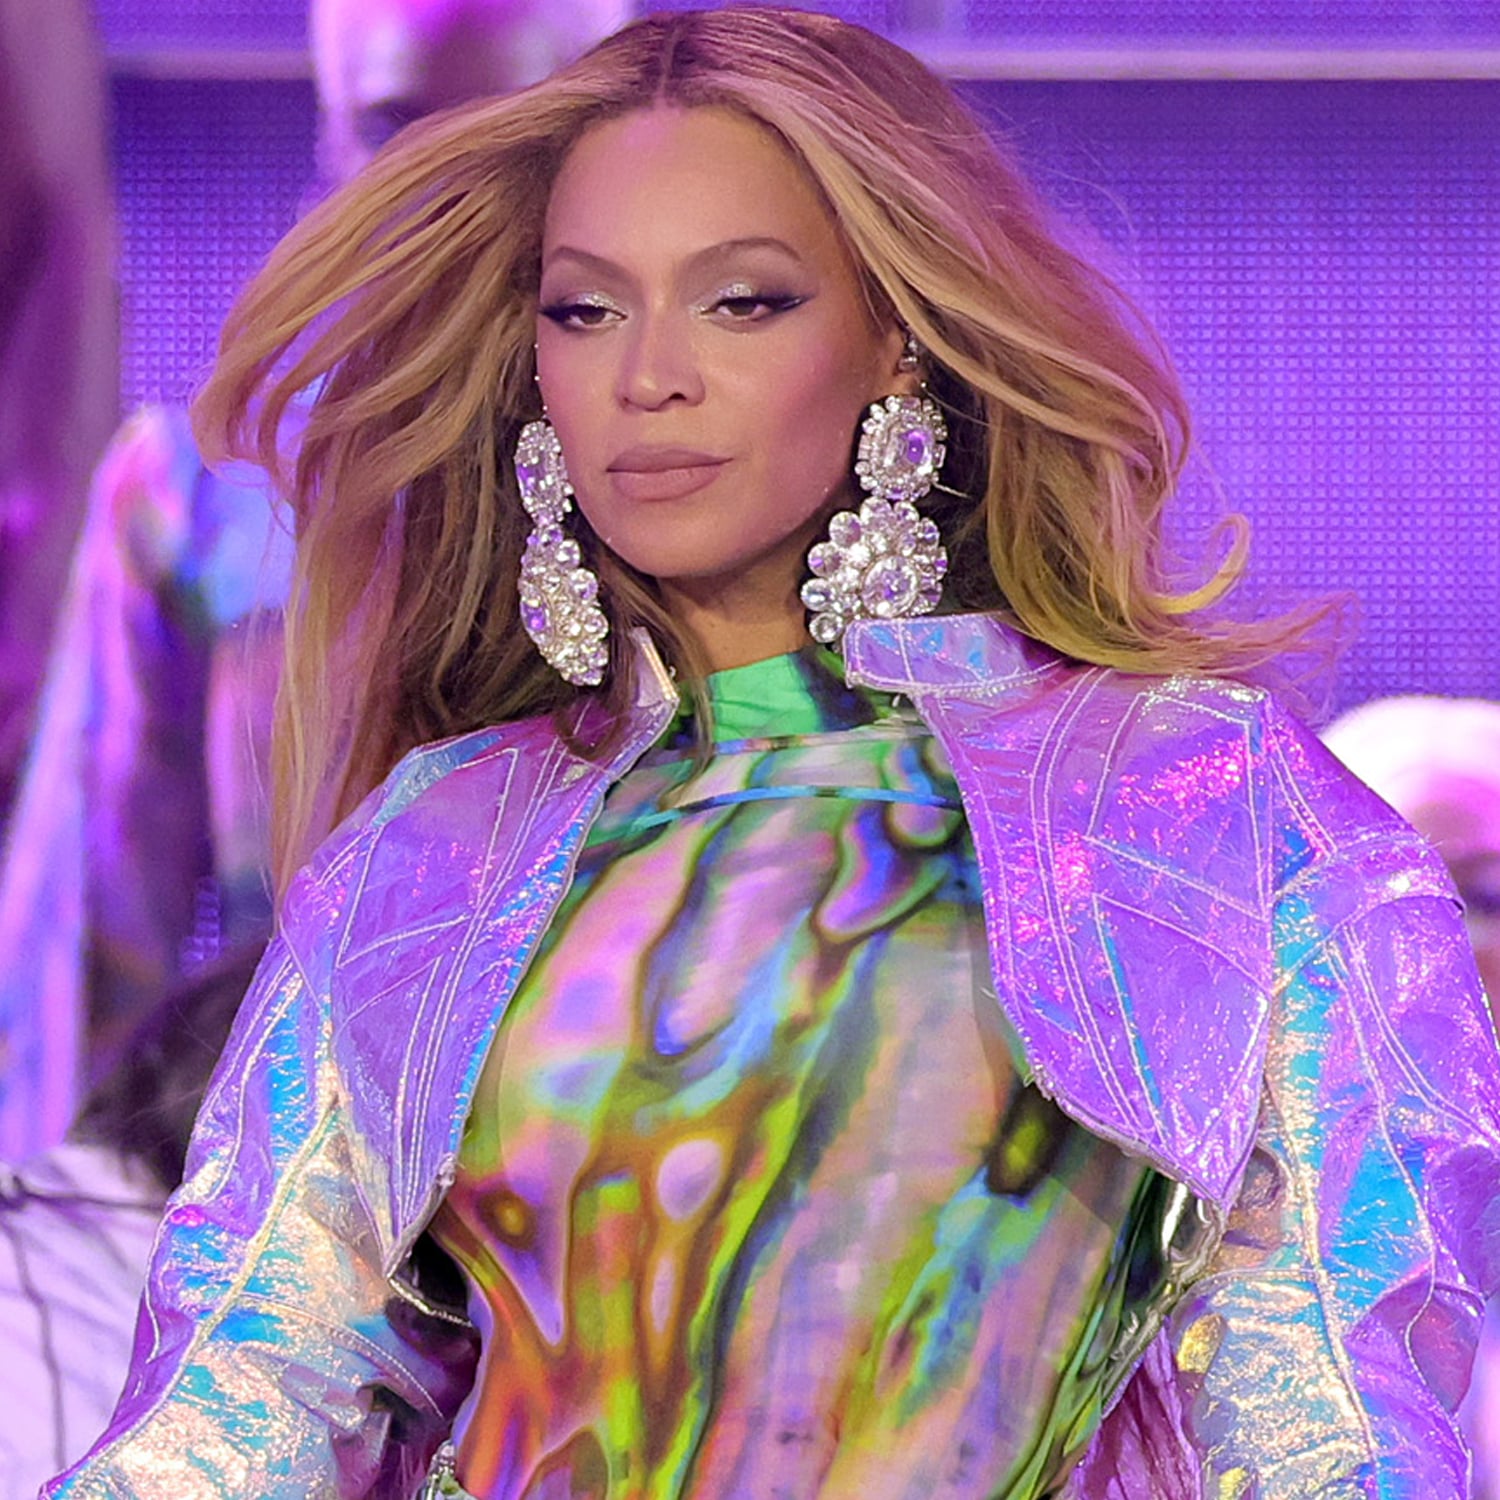 What To Wear To Beyoncé's Renaissance Tour, Based On Her Outfits ...